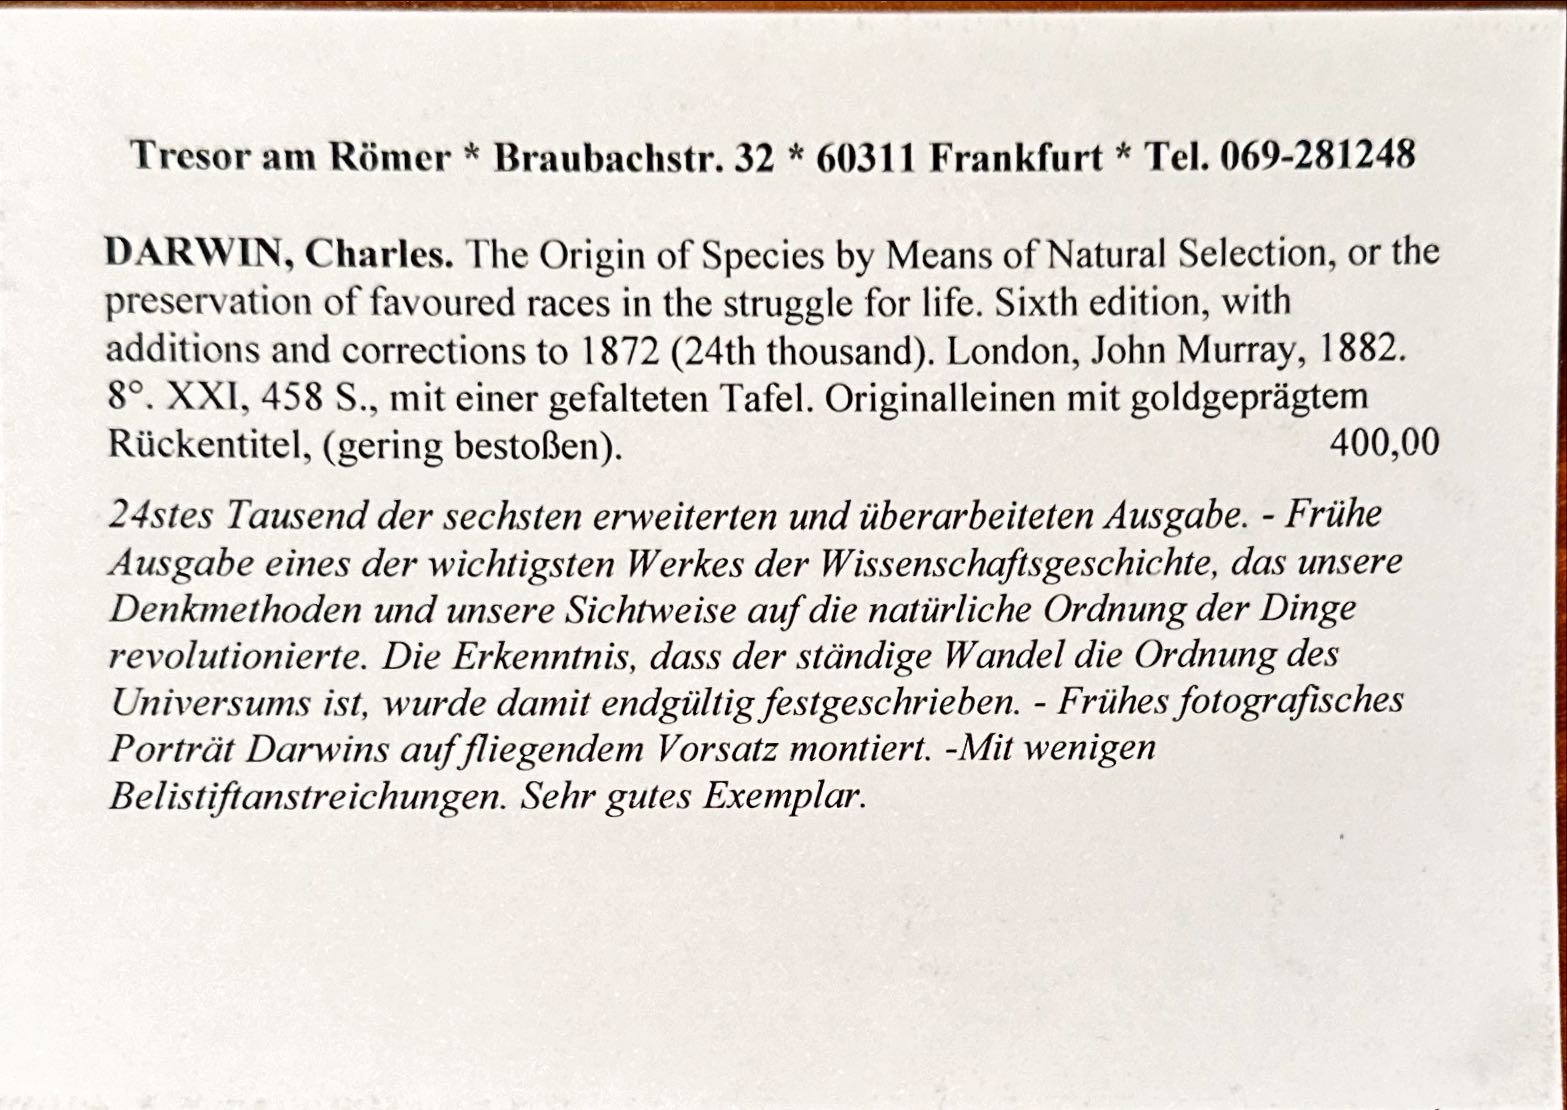 DARWIN, Charles. The Origin of Species by Means of Natural Selection, 1882